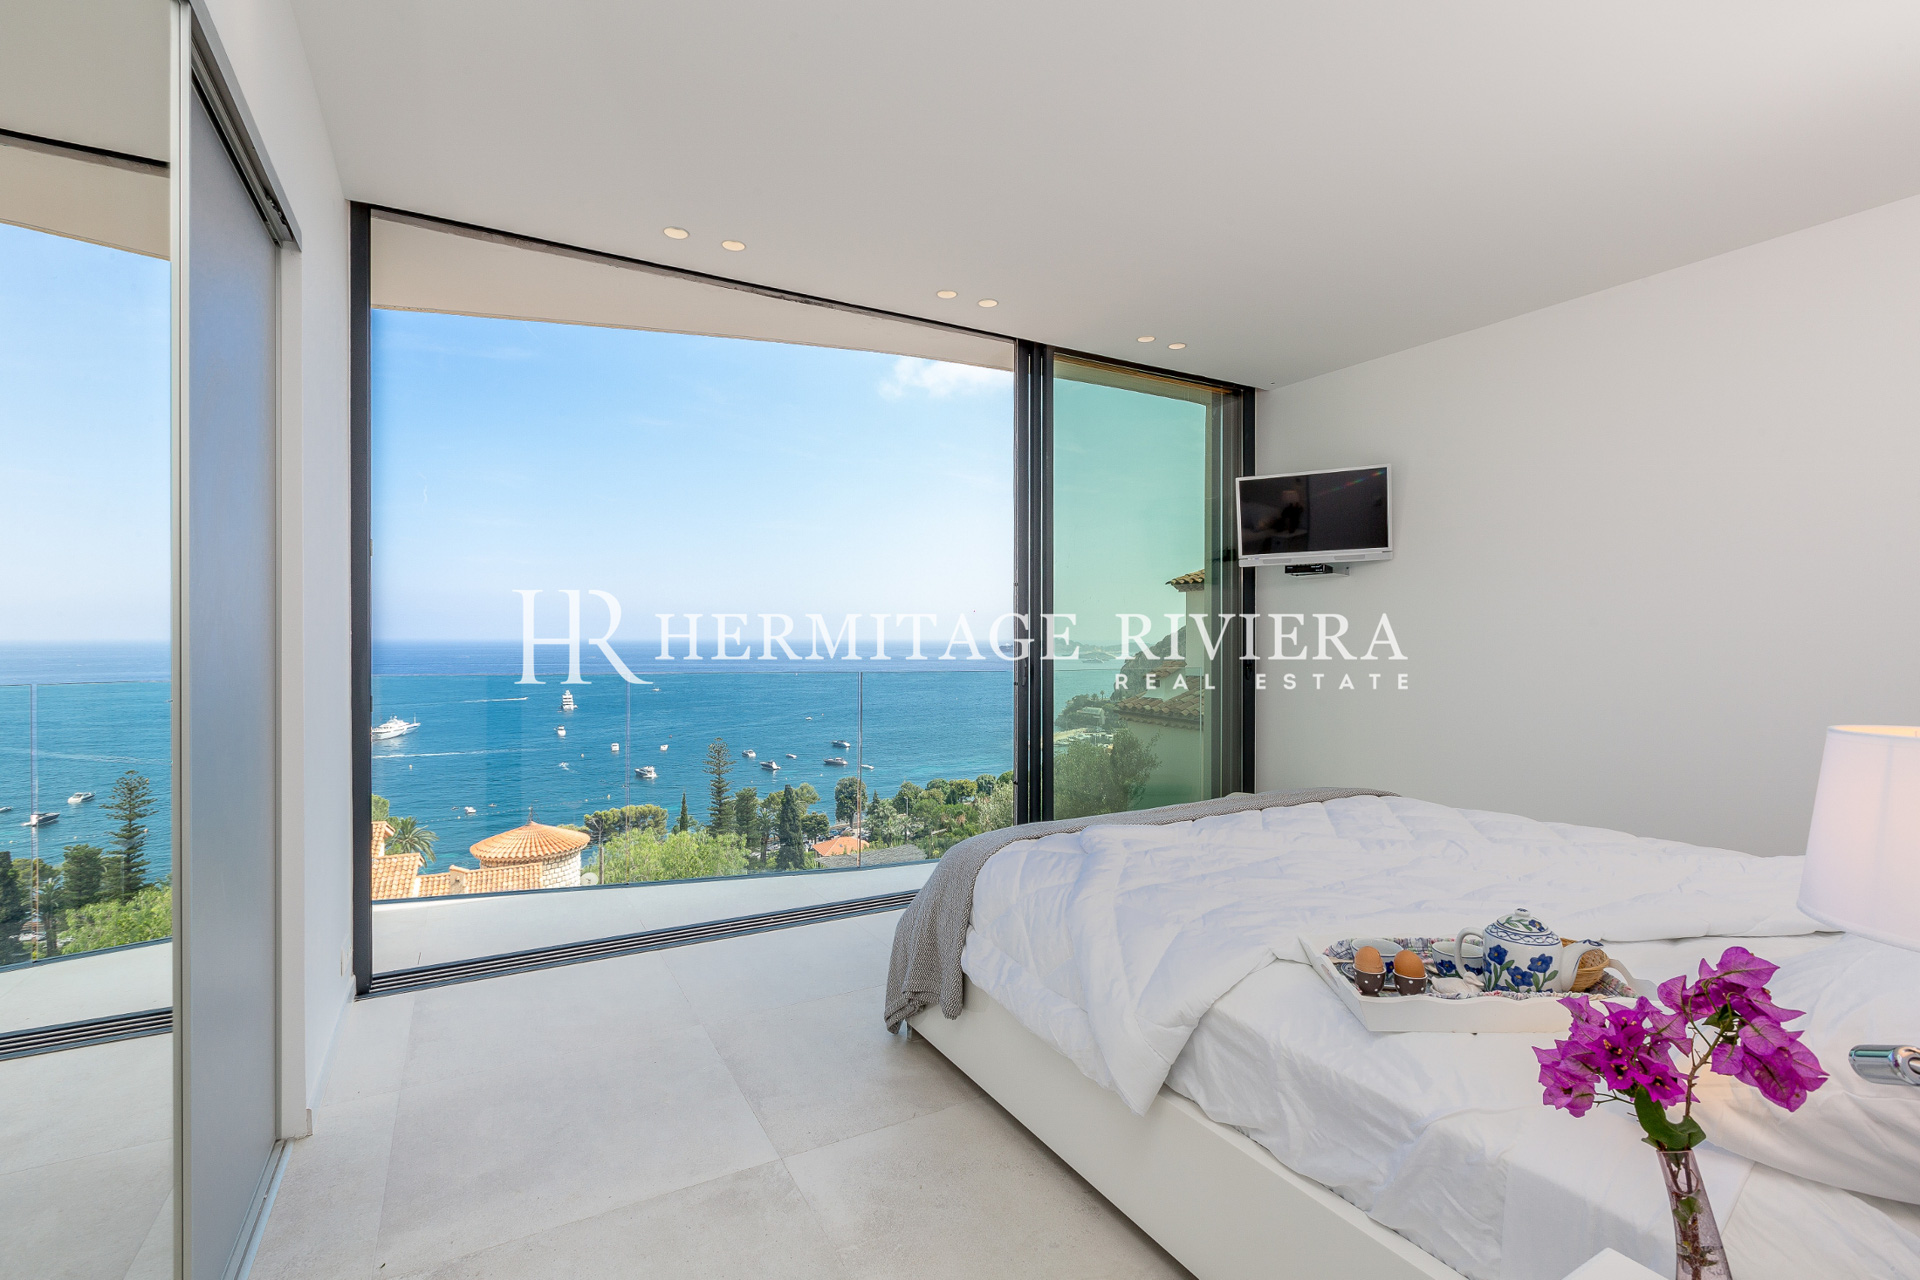 Contemporary villa in walking distance to beach (image 10)